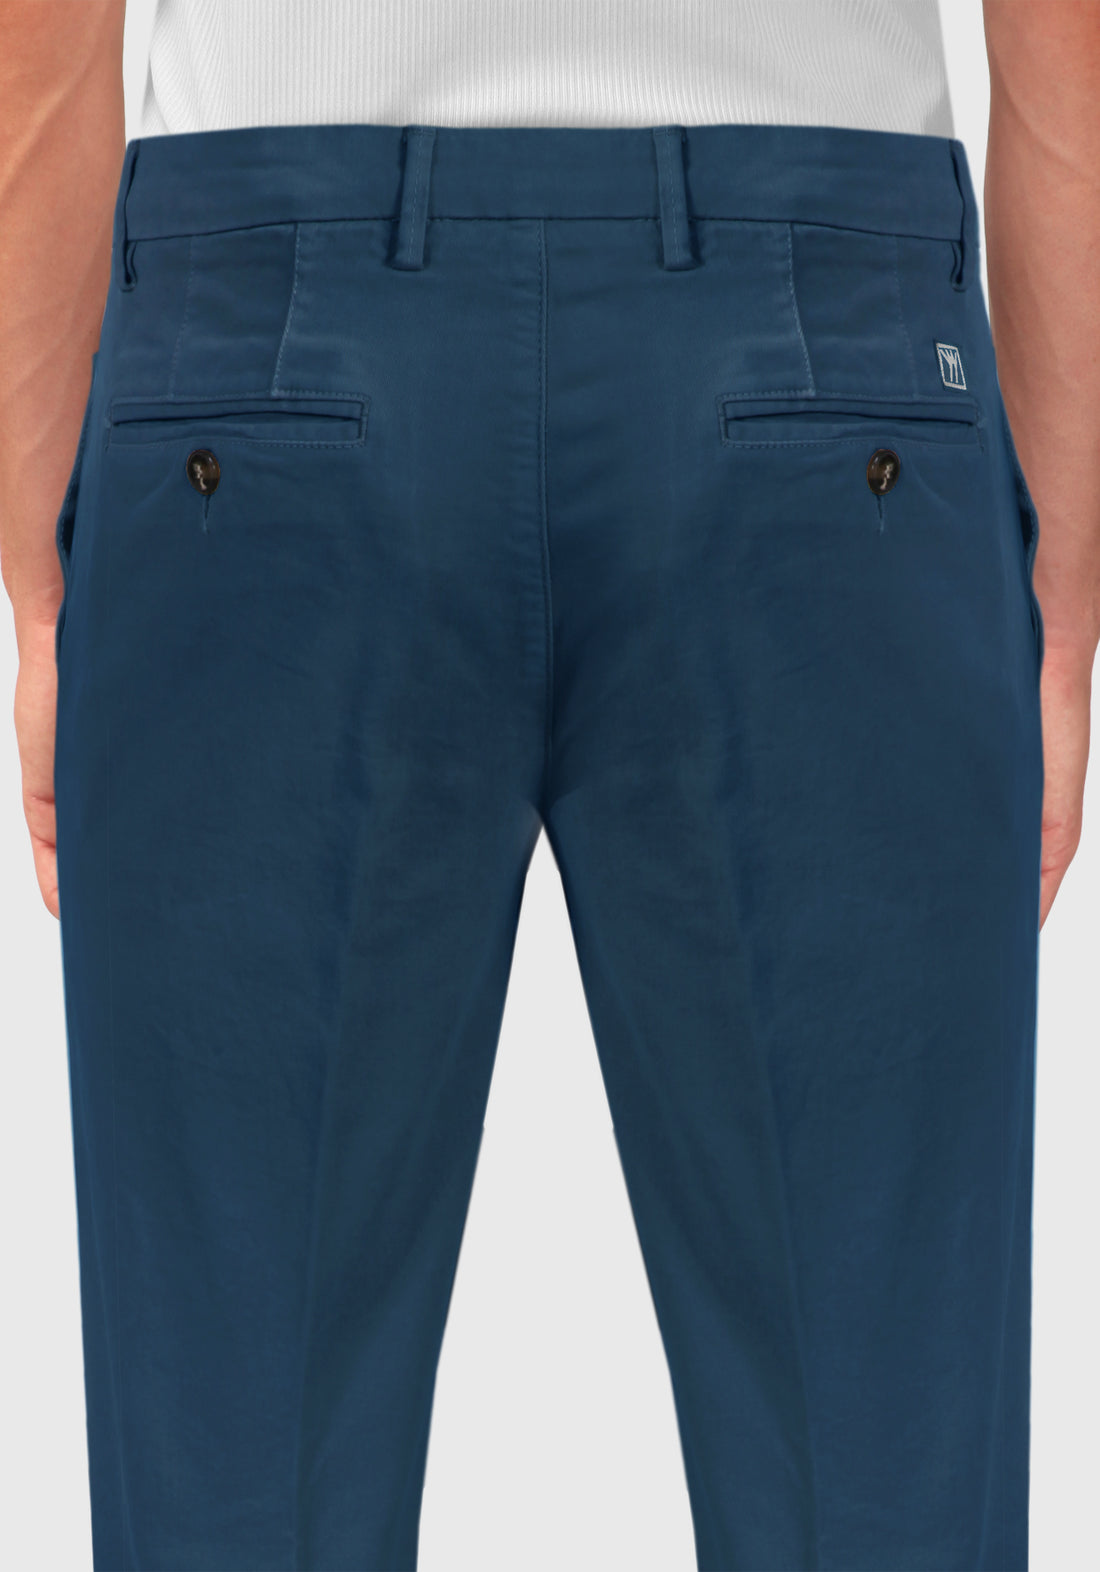 America Pocket Chinos Trousers Warm cotton - Teal